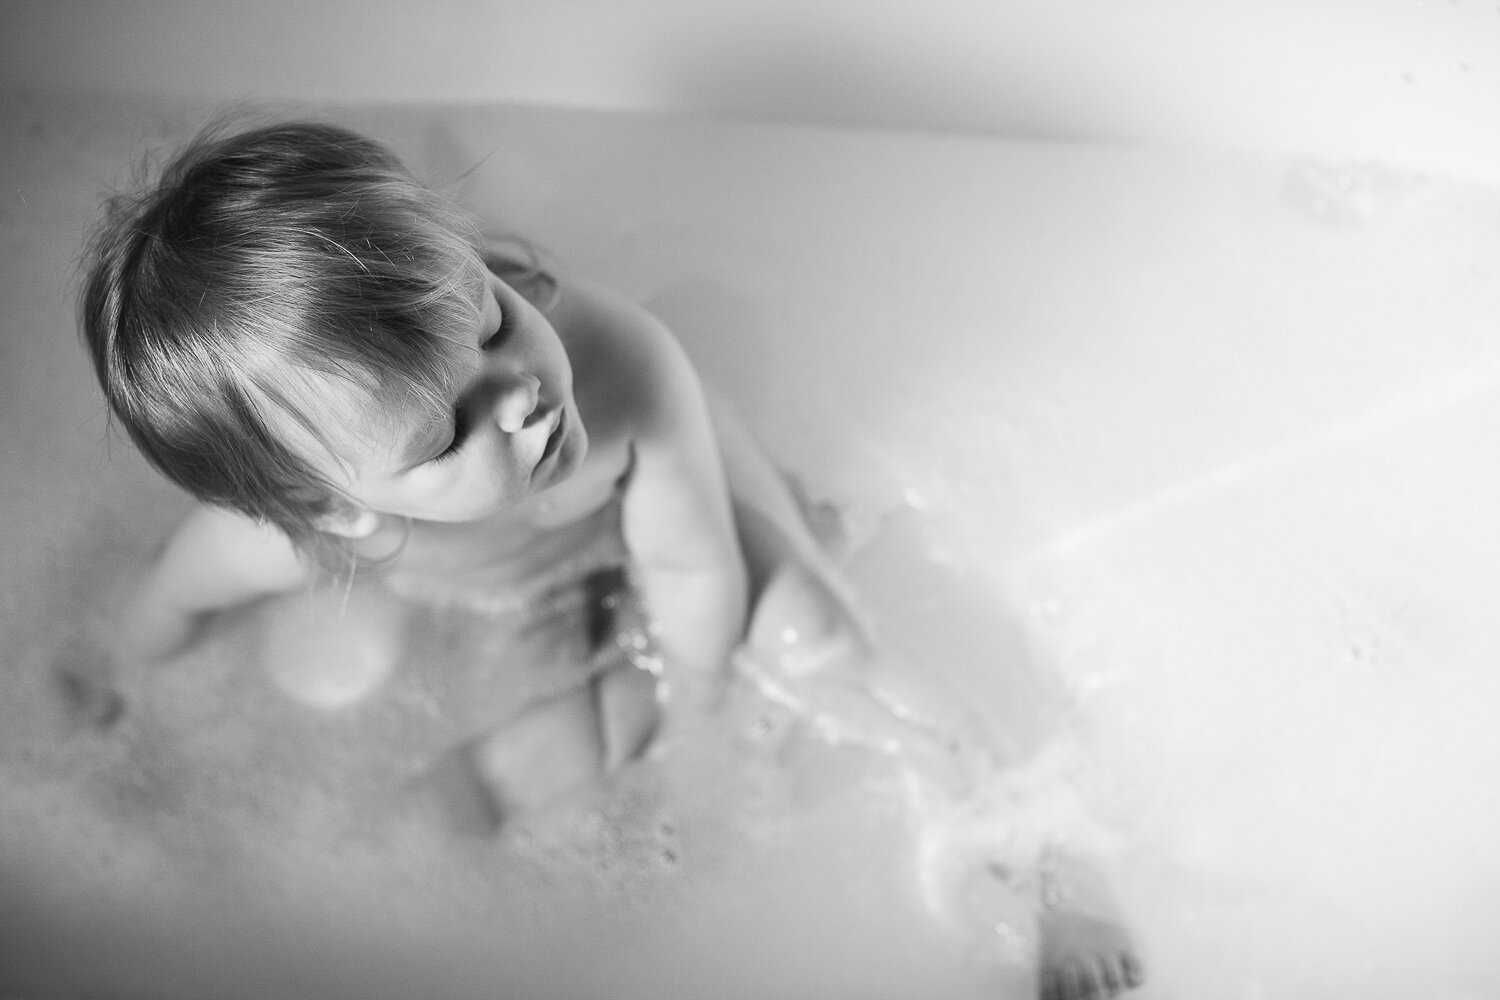  During the first COVID 19 lockdown in New Zealand, Astrid was 2 years and 5 months.  During days with no real agenda, we established a morning bath ritual. I would observe my daughter as she immersed herself in another world filled with bubbles, wat